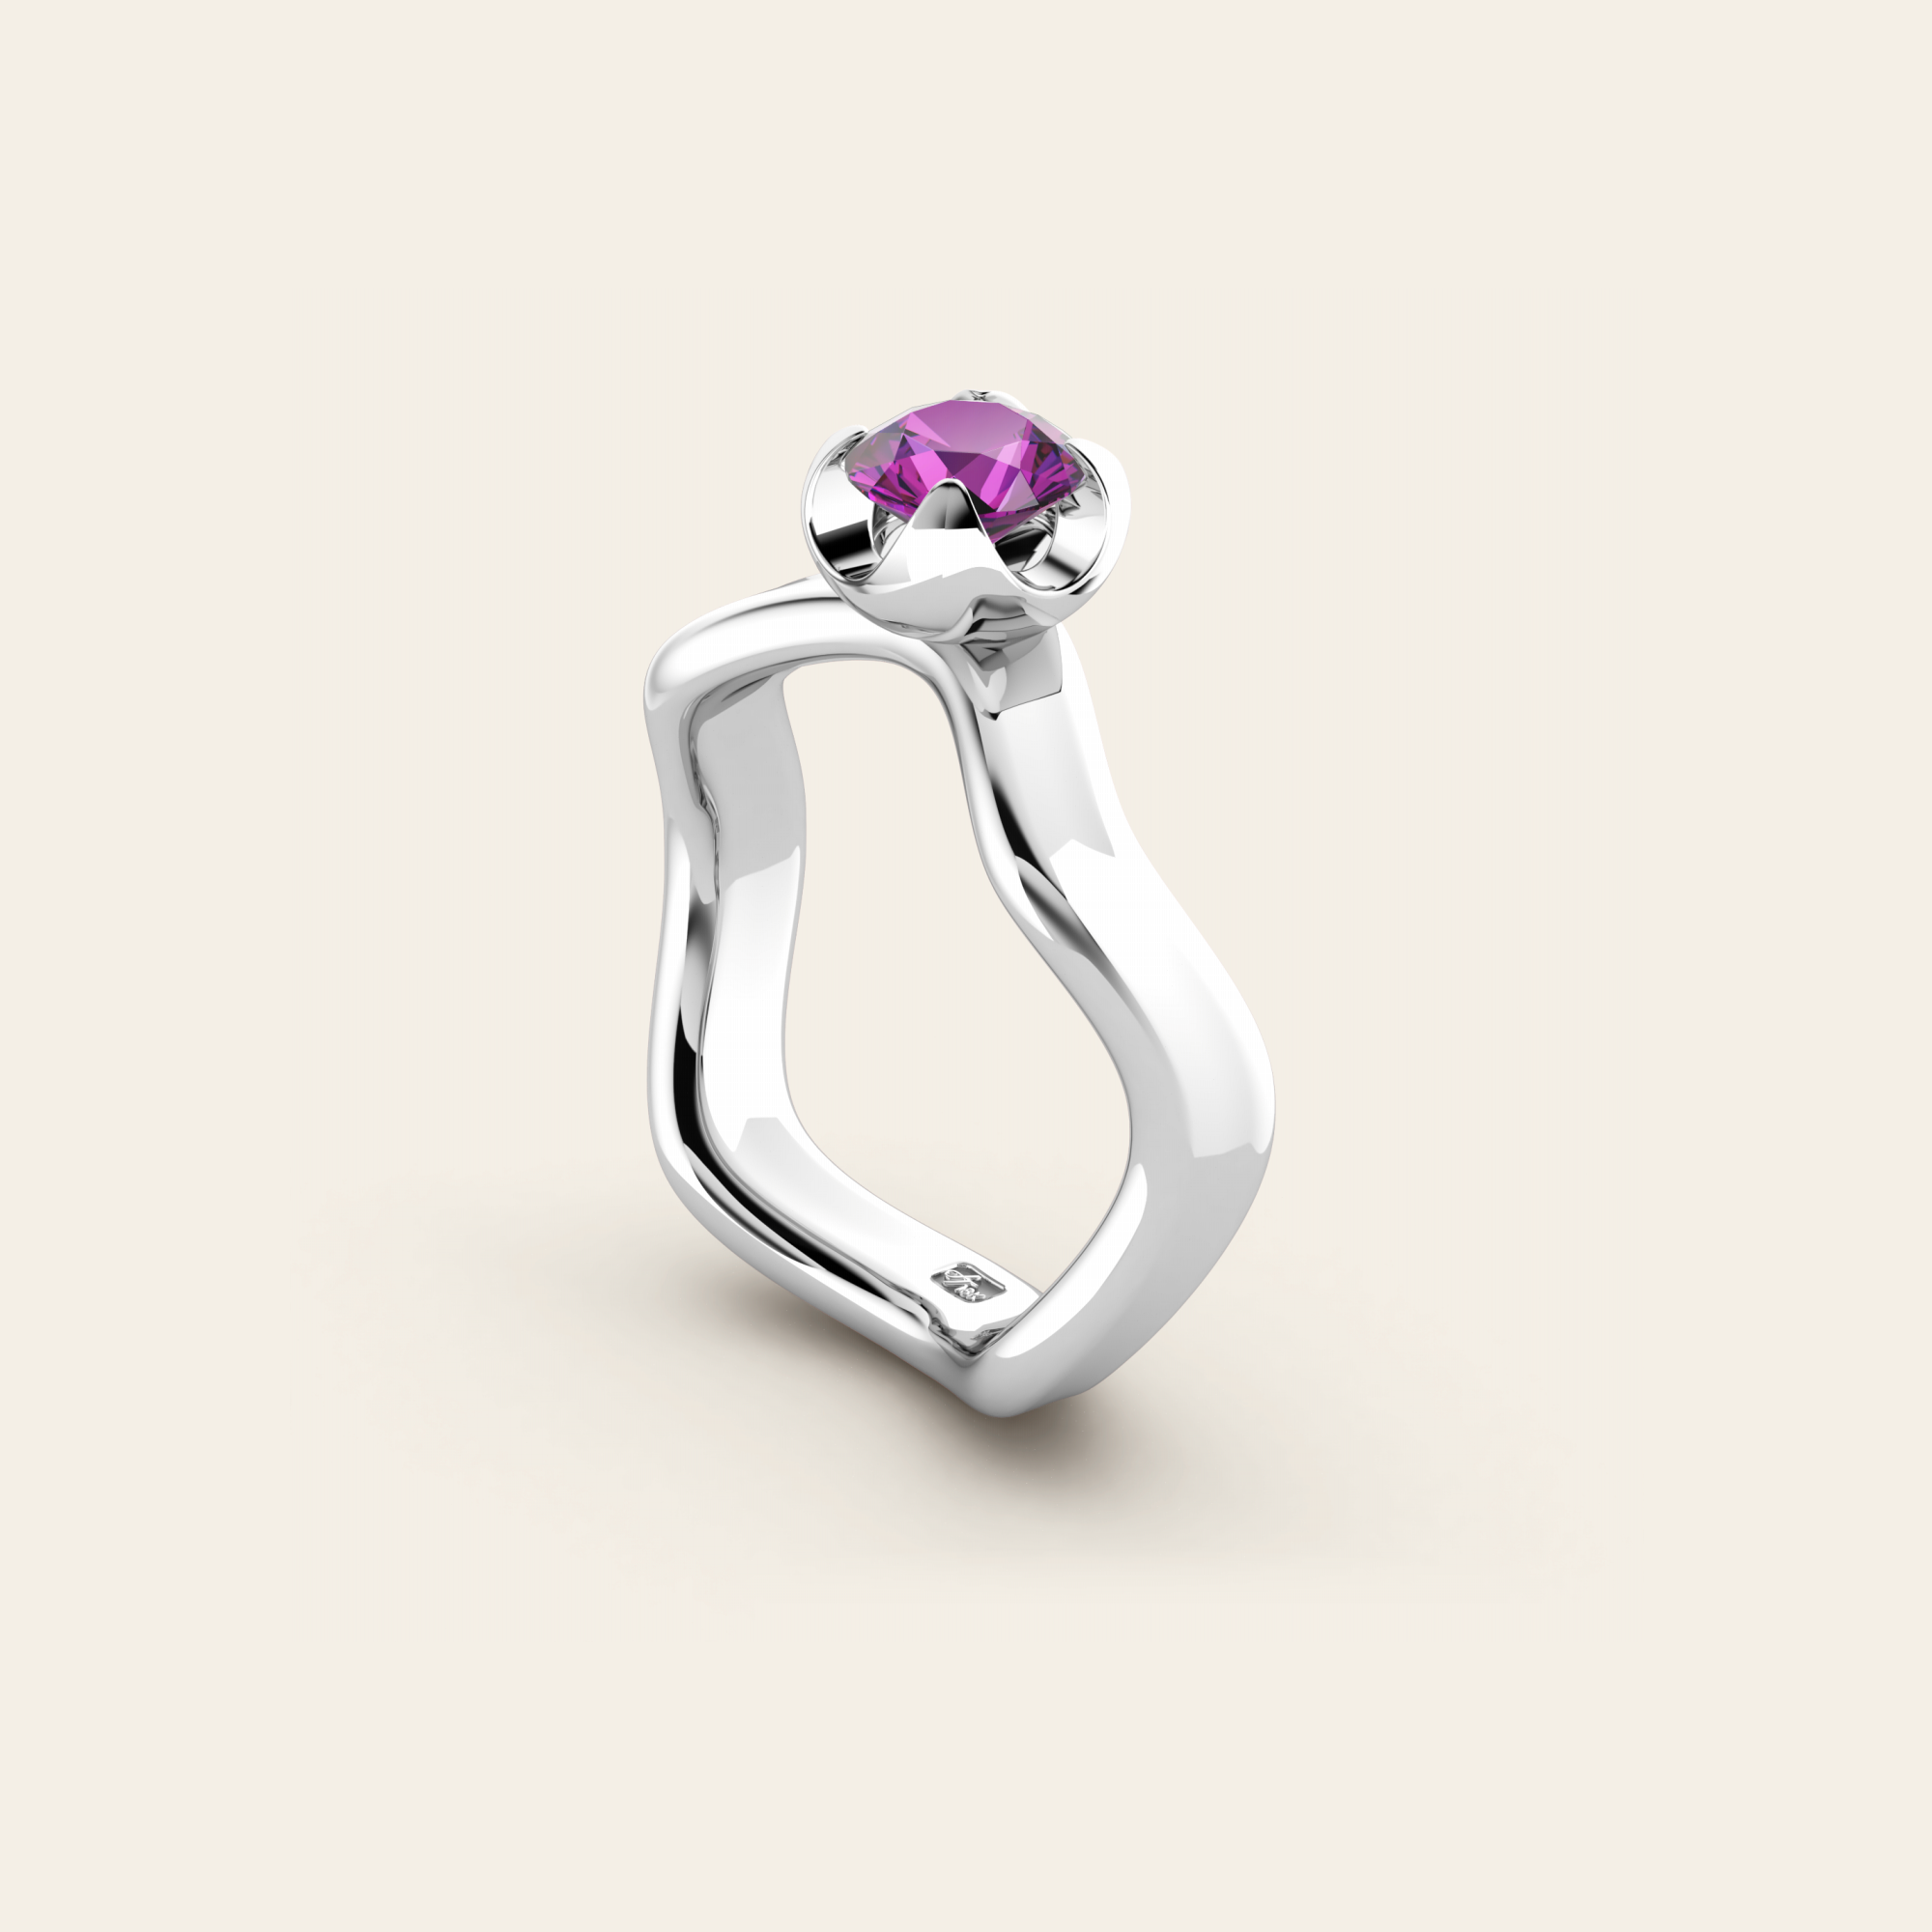 The Smooth Curve Ring with Purple Garnet in 18k White Gold